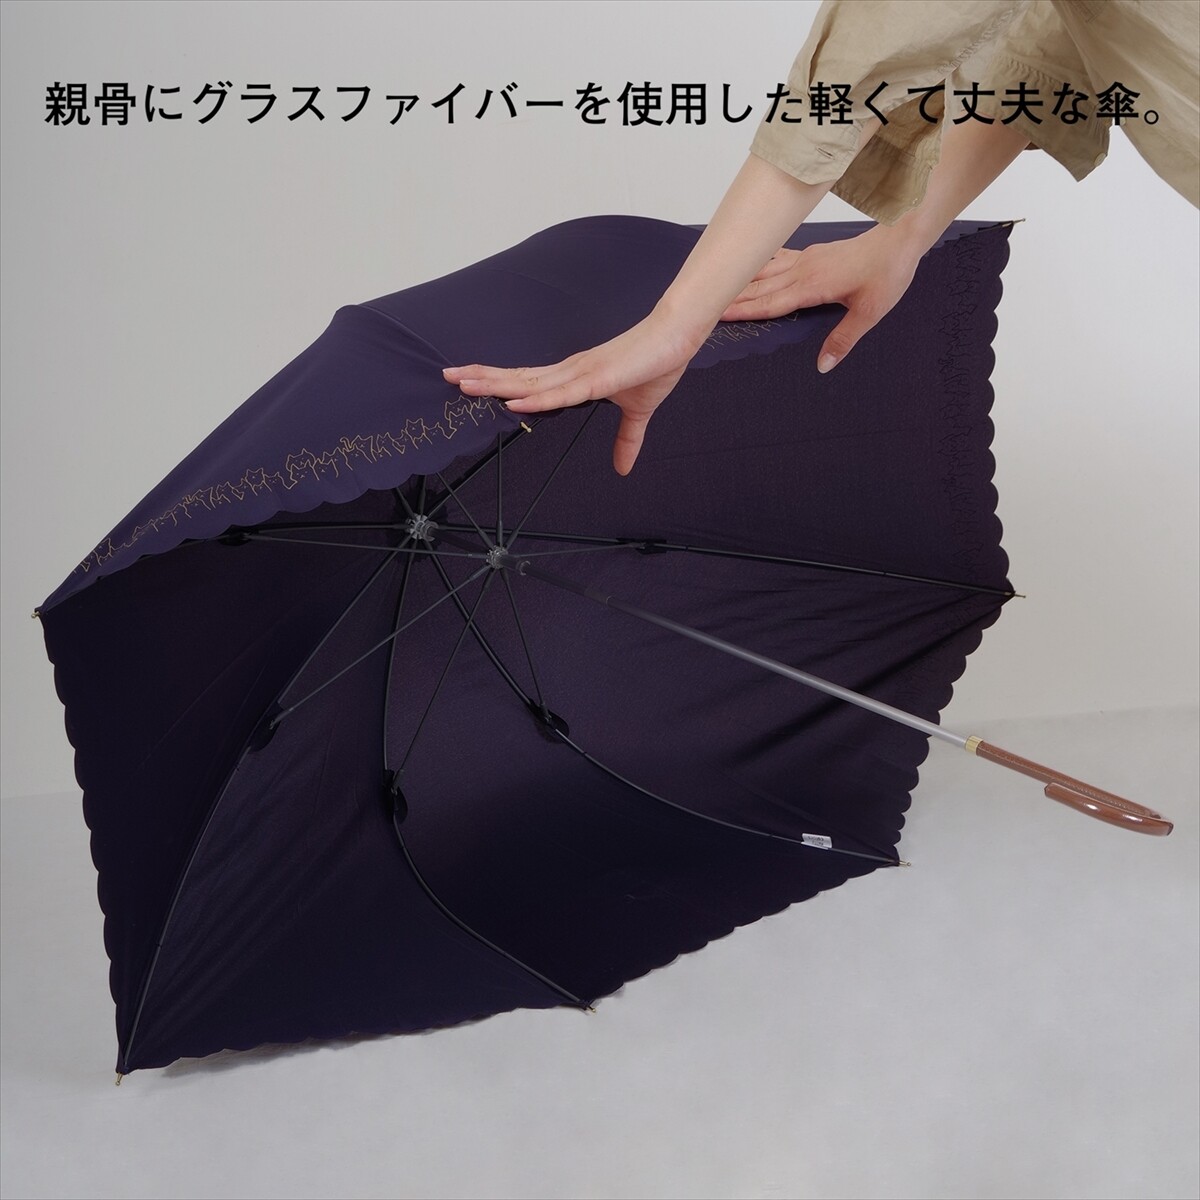 Umbrella Stick Umbrella Flare Import Japanese Products At Wholesale Prices Super Delivery